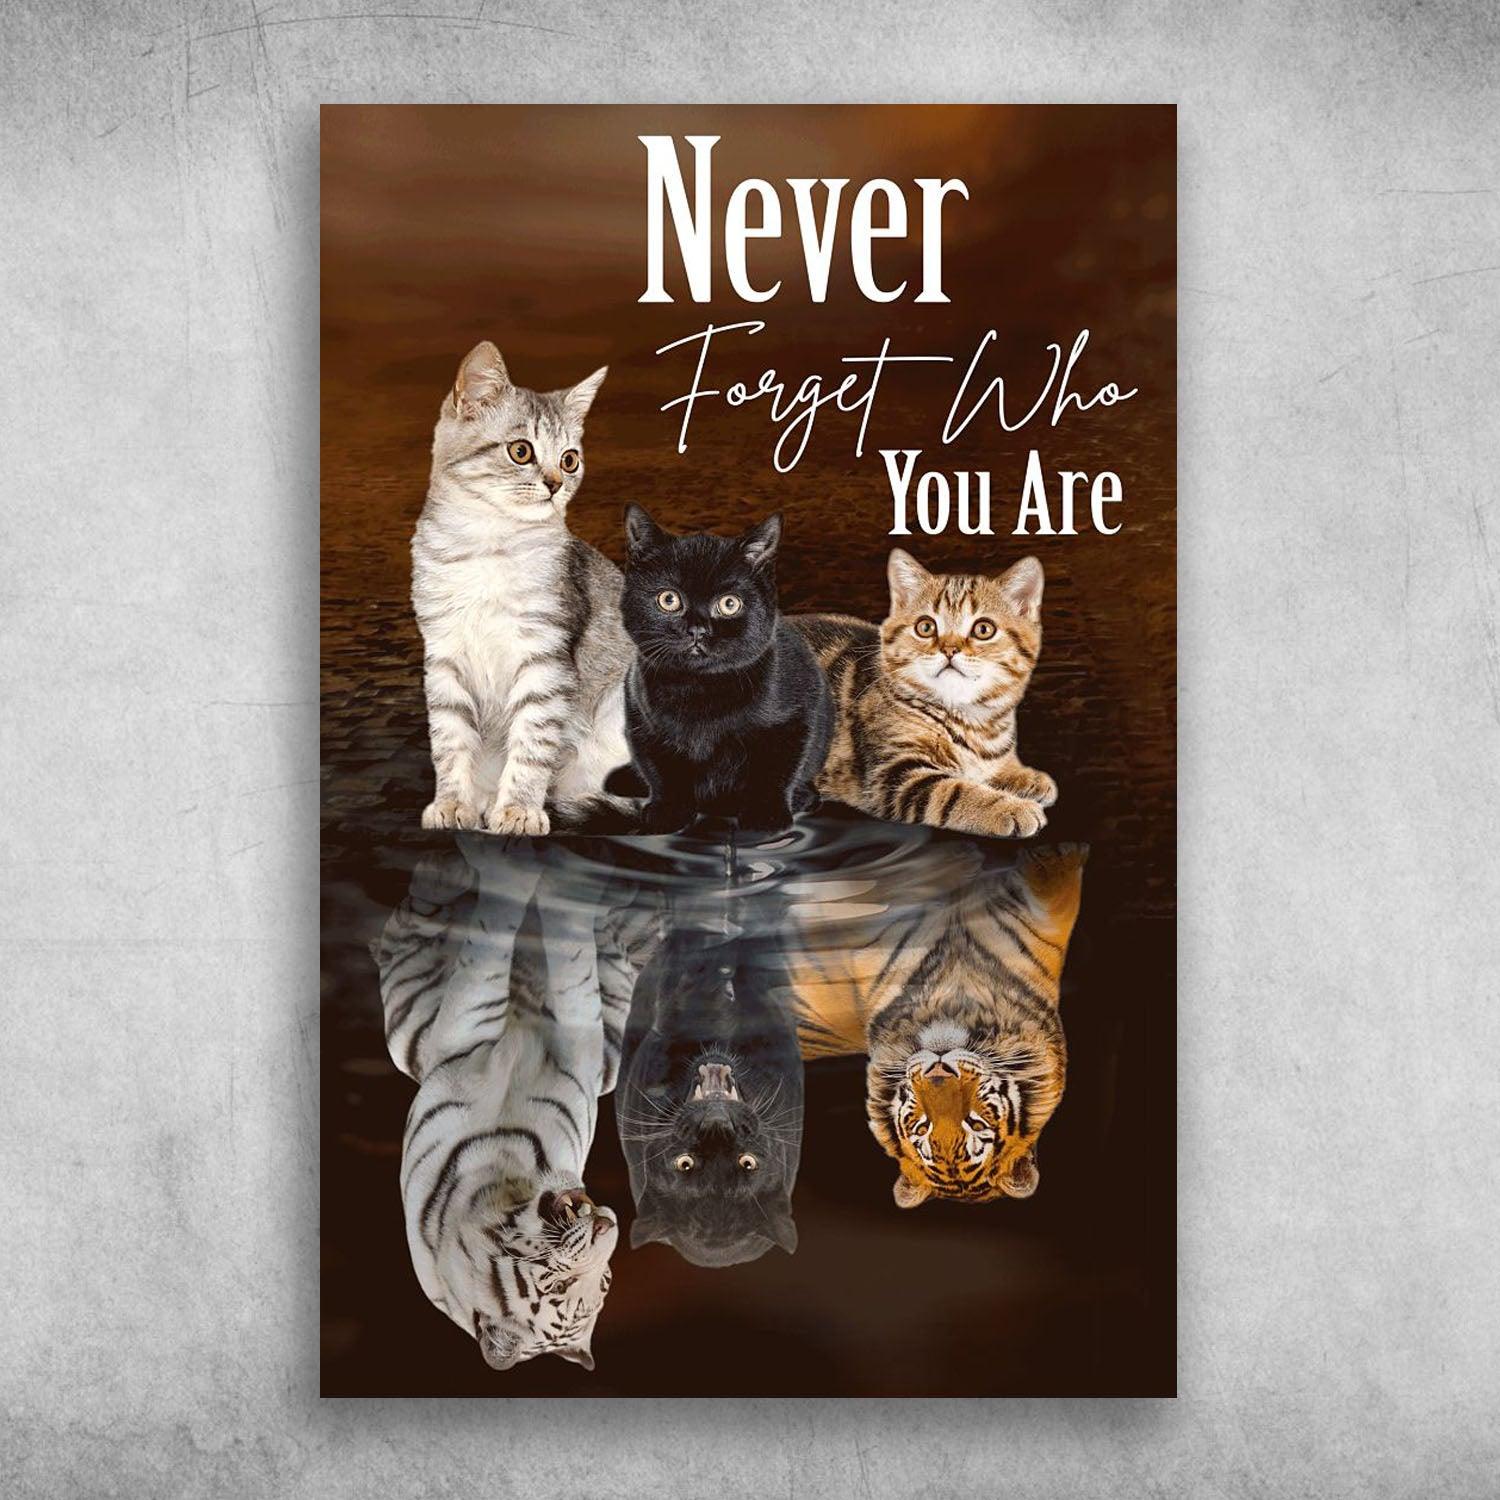 Cat & Tiger Portrait Canvas - Never Forget Who You Are Canvas - Perfect Gift For Cat Lover, Tiger Lover - Amzanimalsgift